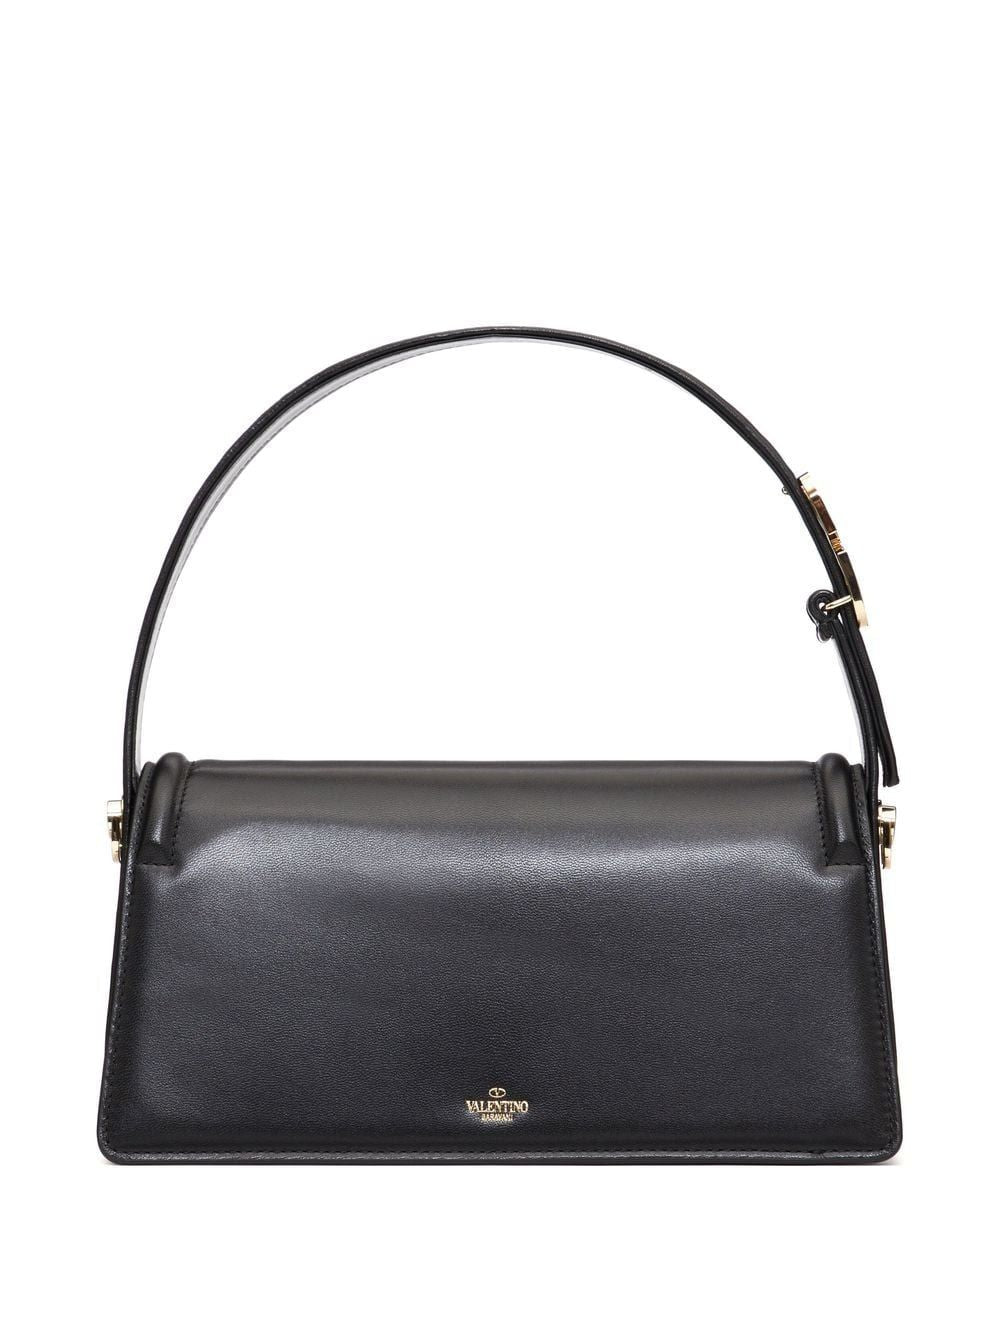 VALENTINO Stylish Black Shoulder Bag for Women - SS23 Collection